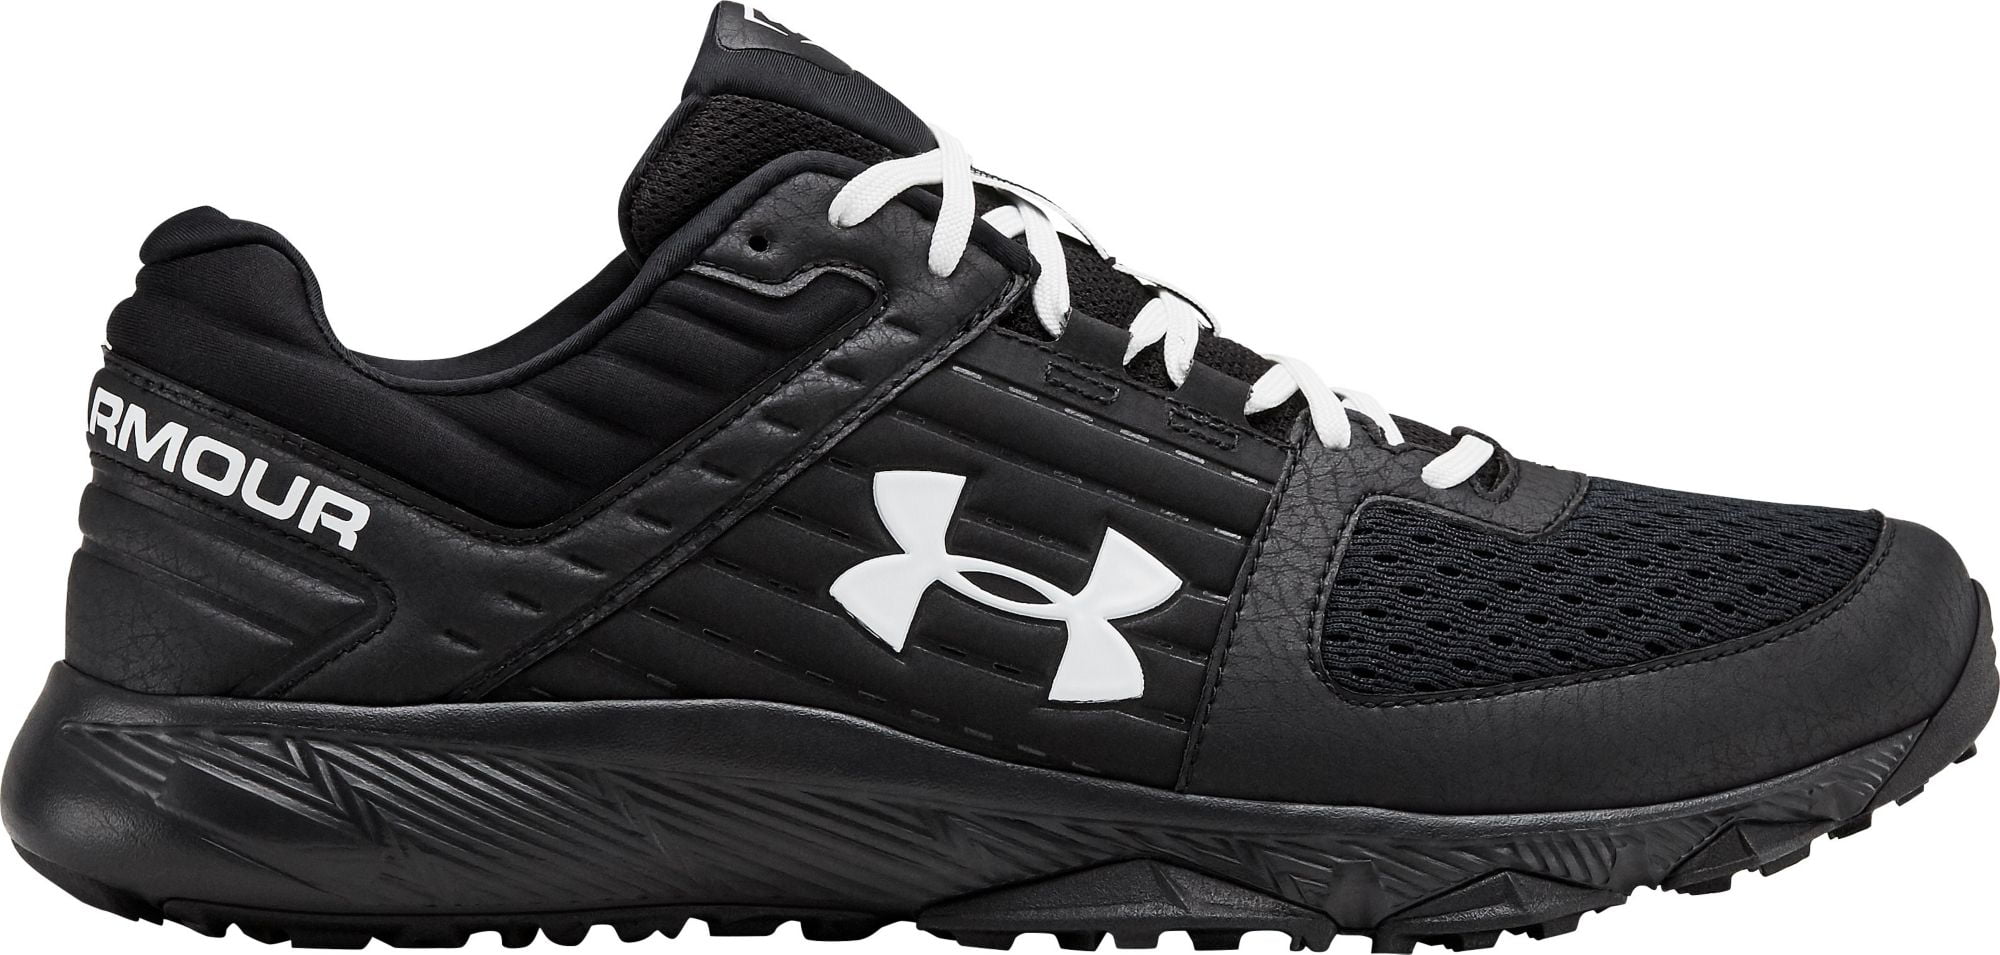 under armour youth baseball turf shoes